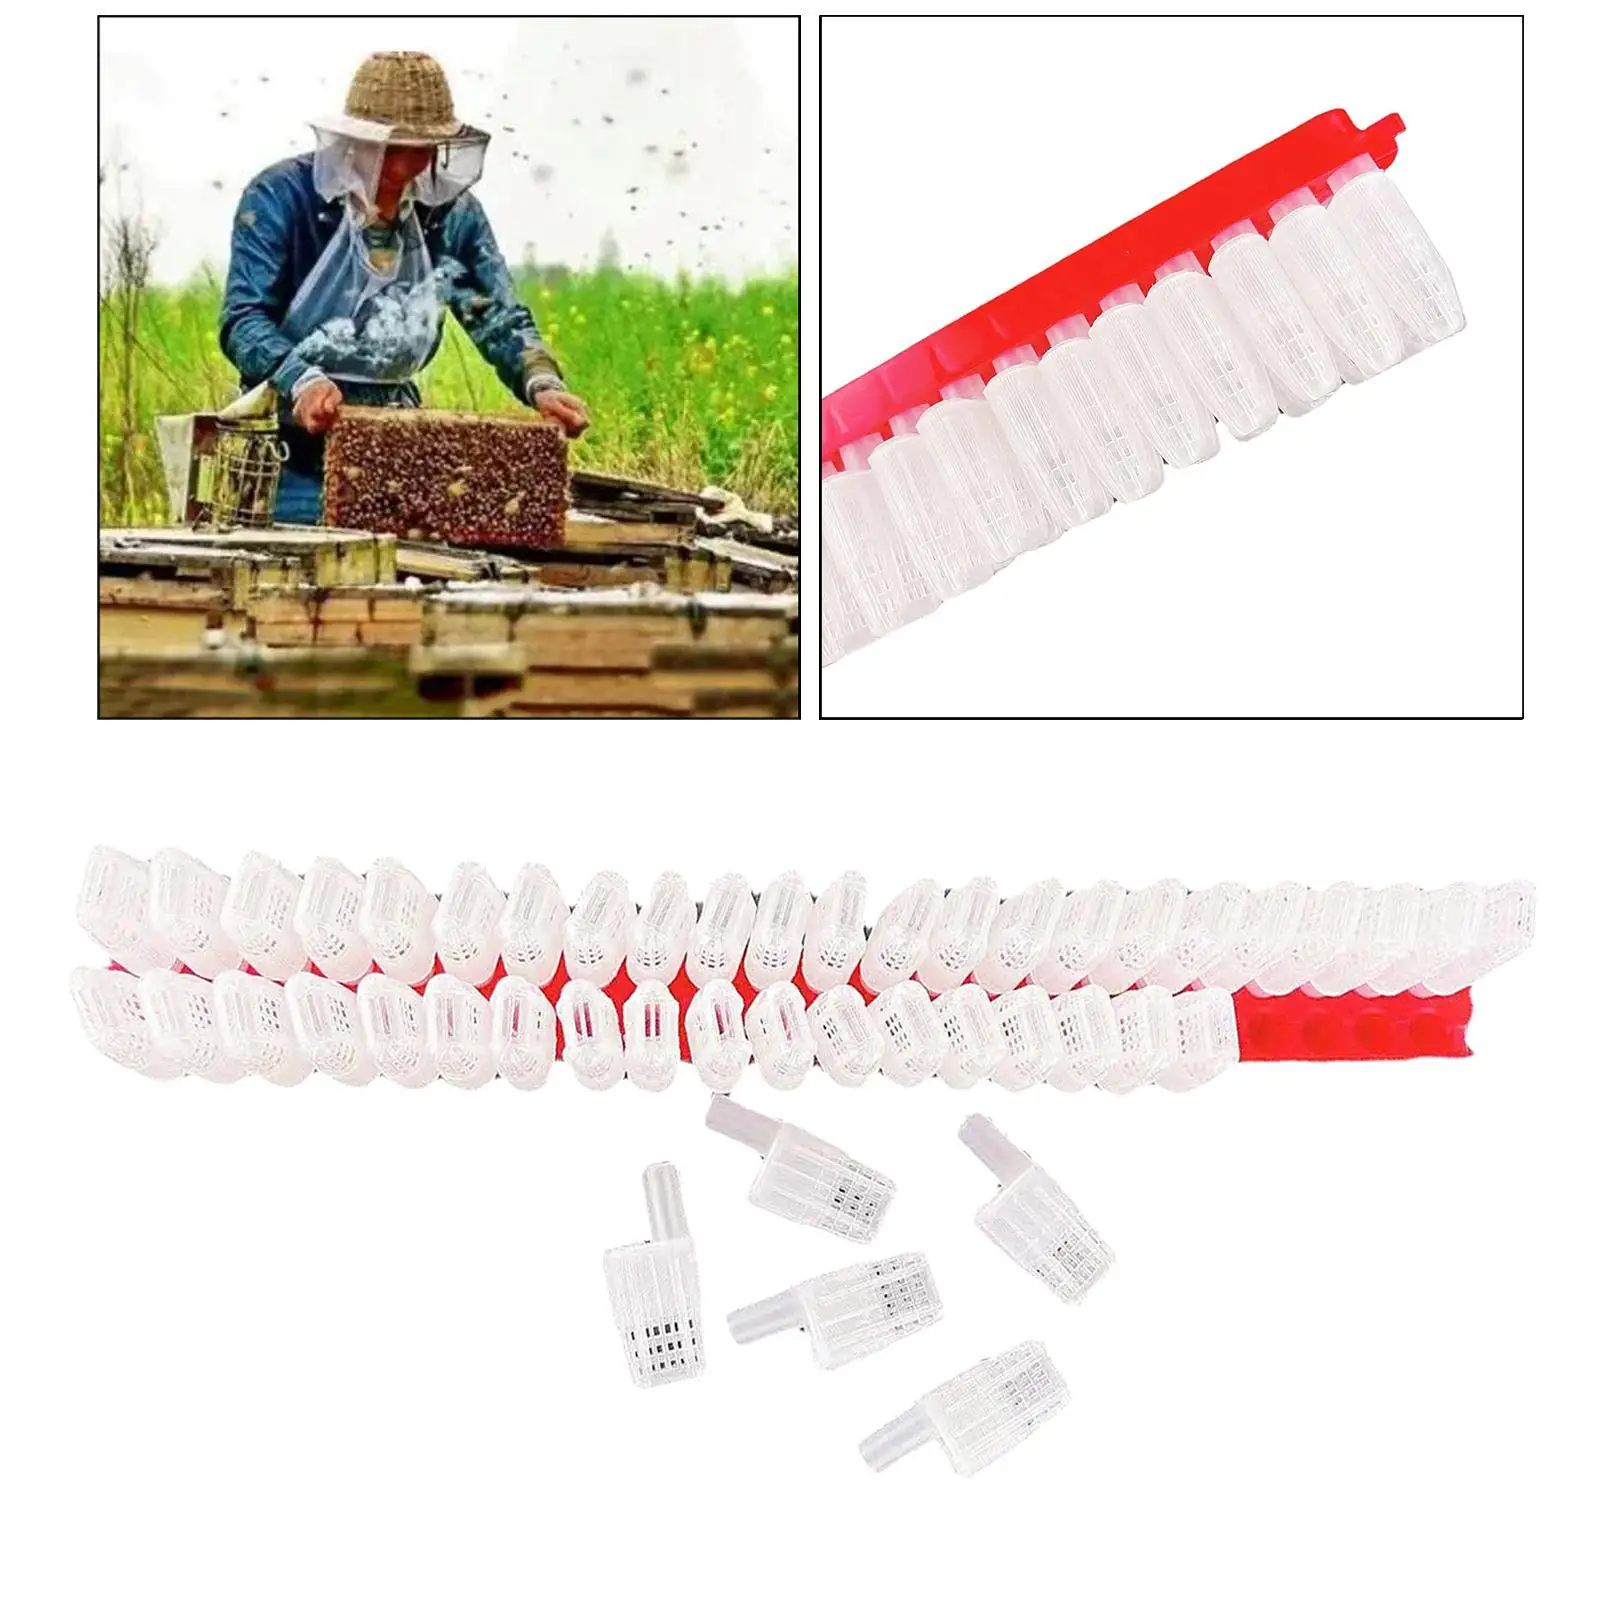 46/Set Plastic Queen Bee Moving Cage Protection Beekeeping Equipment Tools